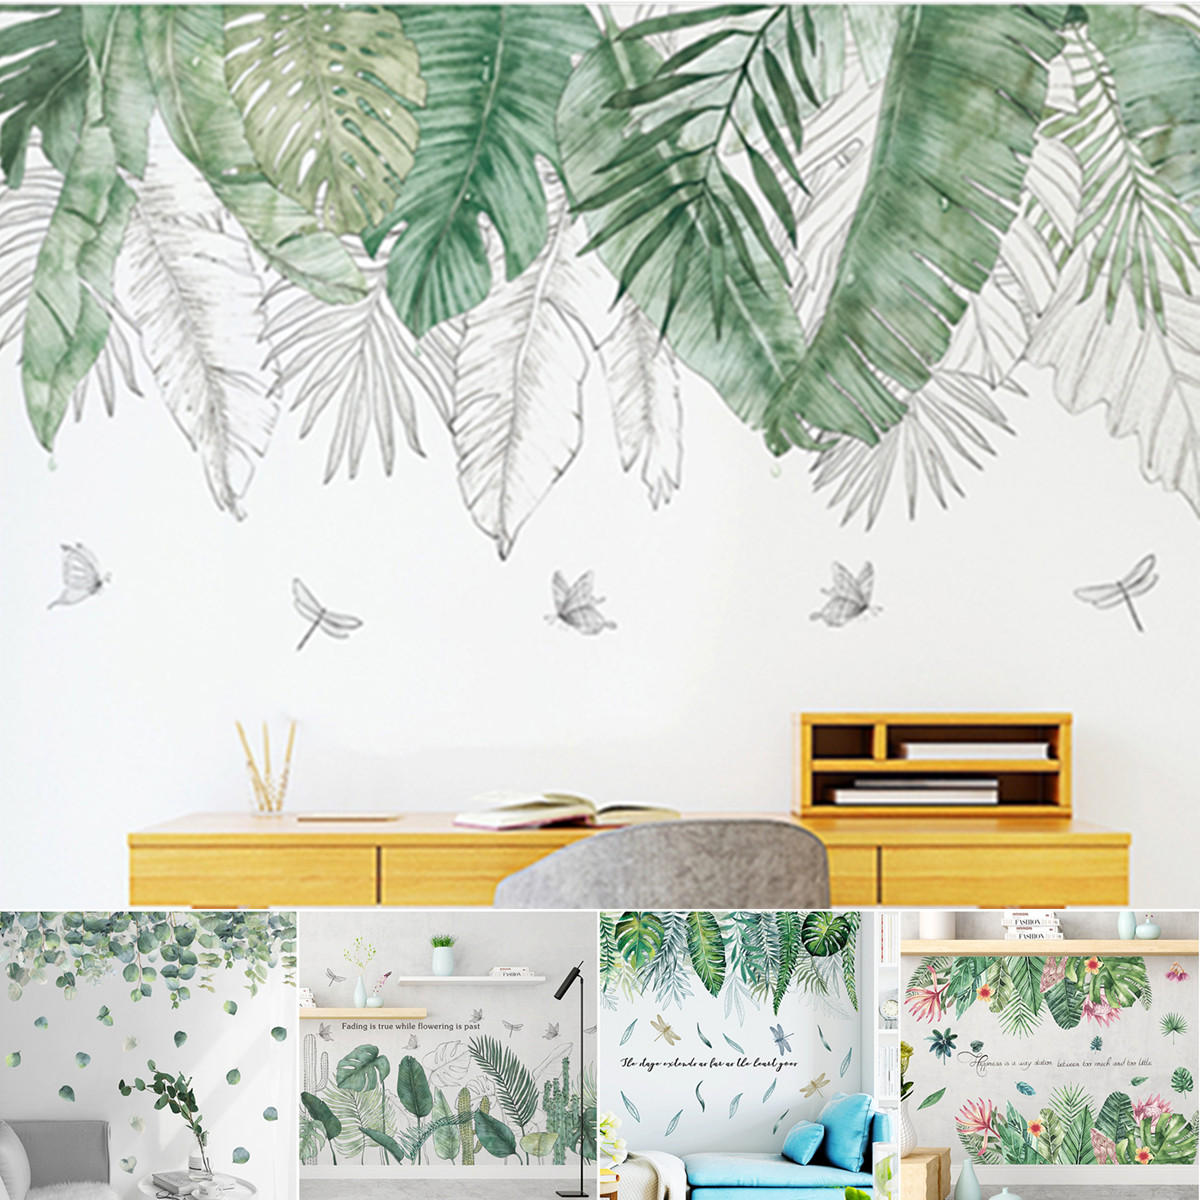 

DIY Tropical Leaves Plant Flower Wall Sticker Art Home Decor Office Decal Mural